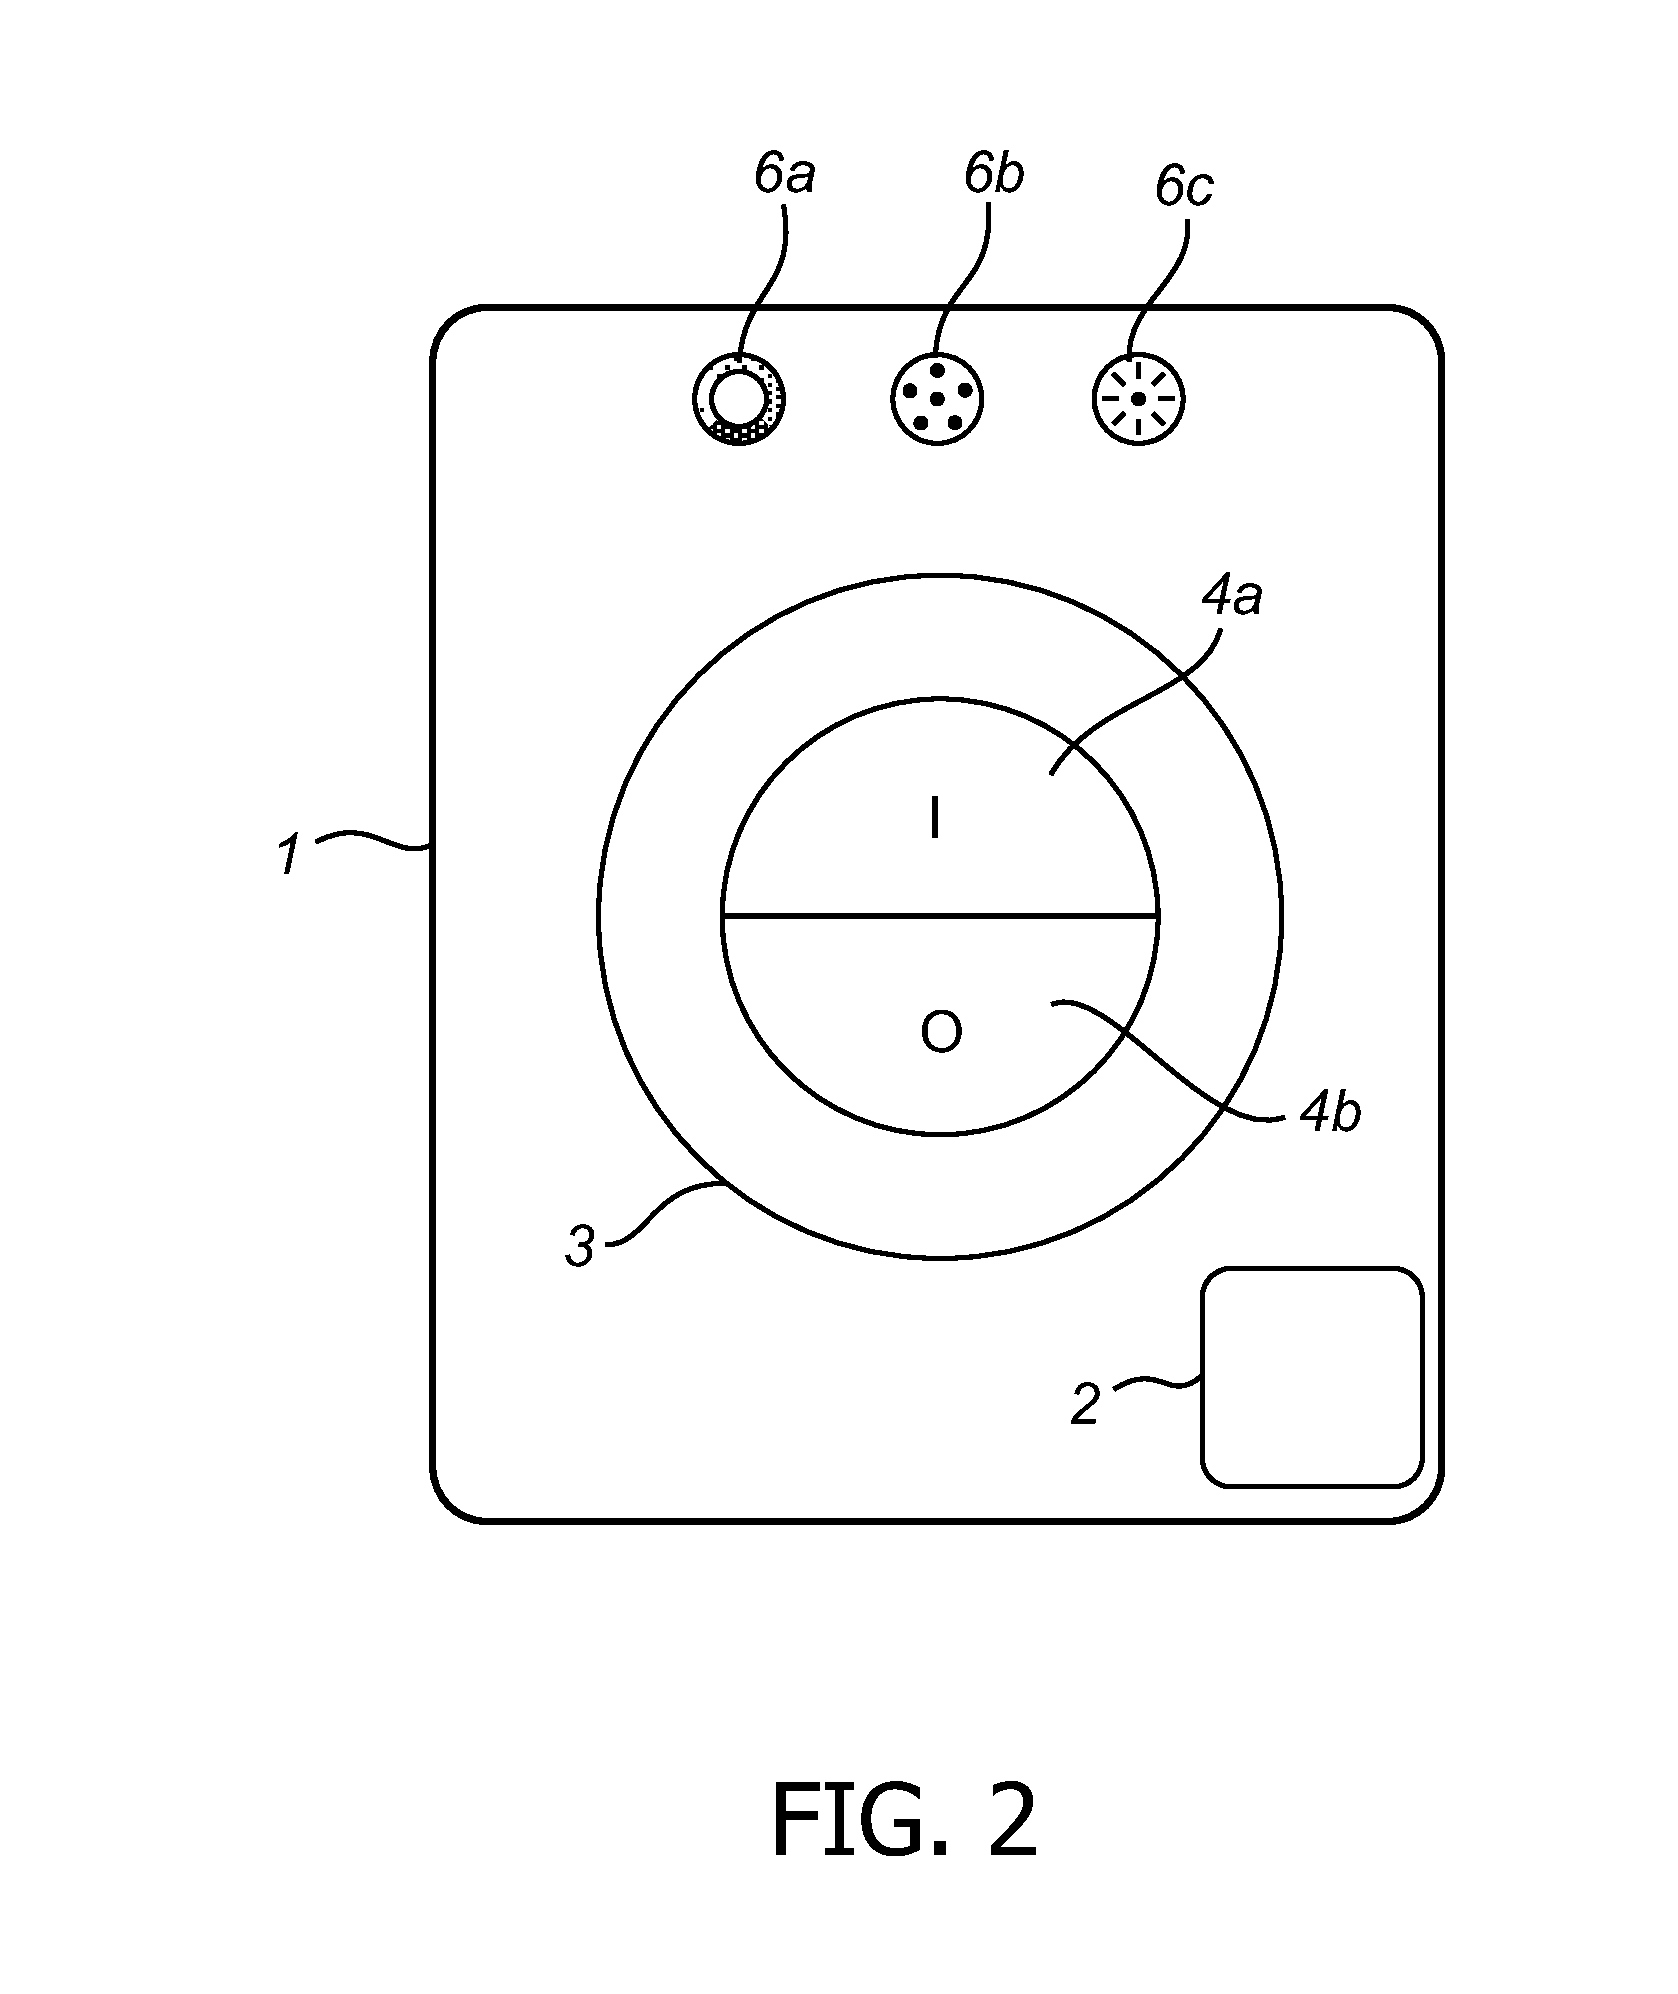 User interface with circular light guided ring with adaptive appearance depending on function